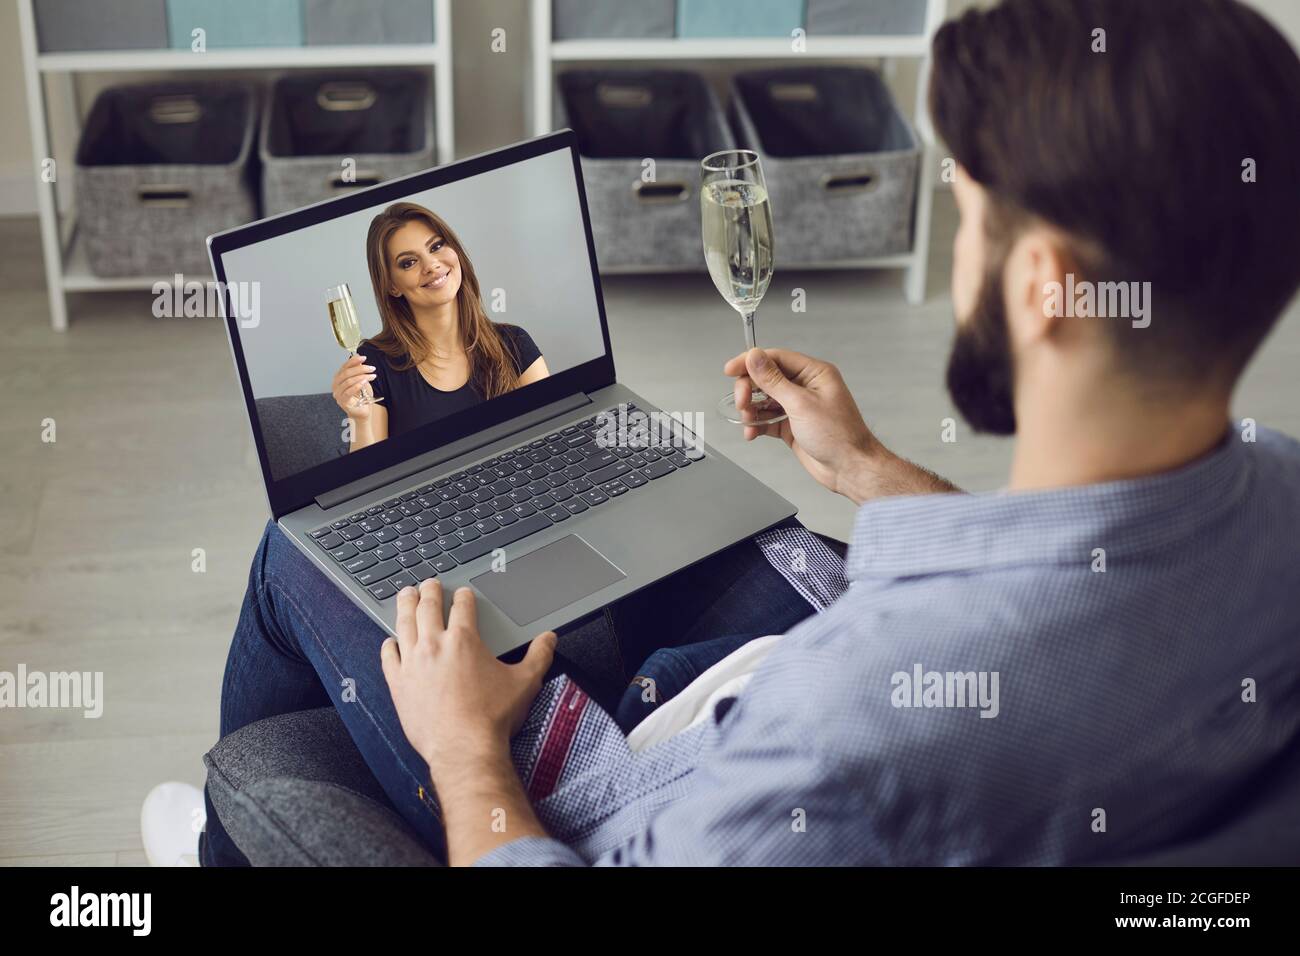 Online dating. Online meeting of a young man and woman. A man uses a video call, holds a glass of champagne and communicates with a beautiful woman. Stock Photo